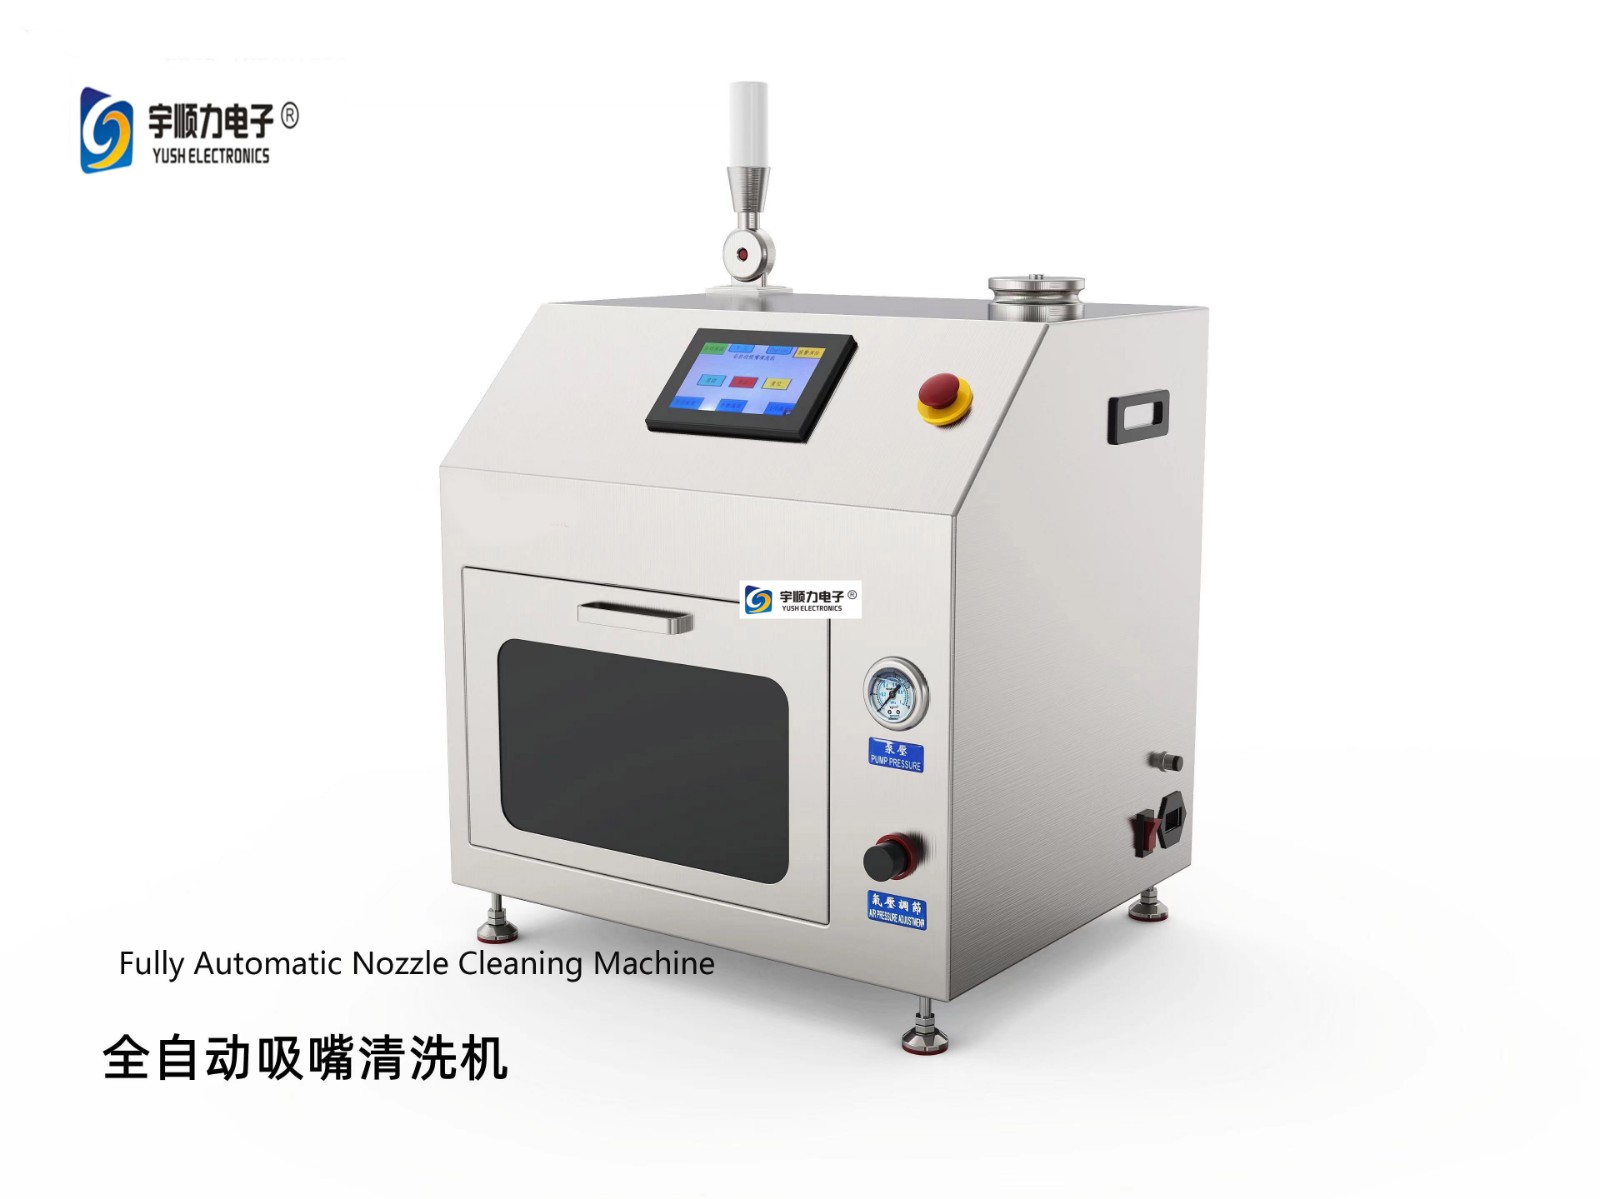 Fully Automatic Nozzle Cleaning Machine.jpg